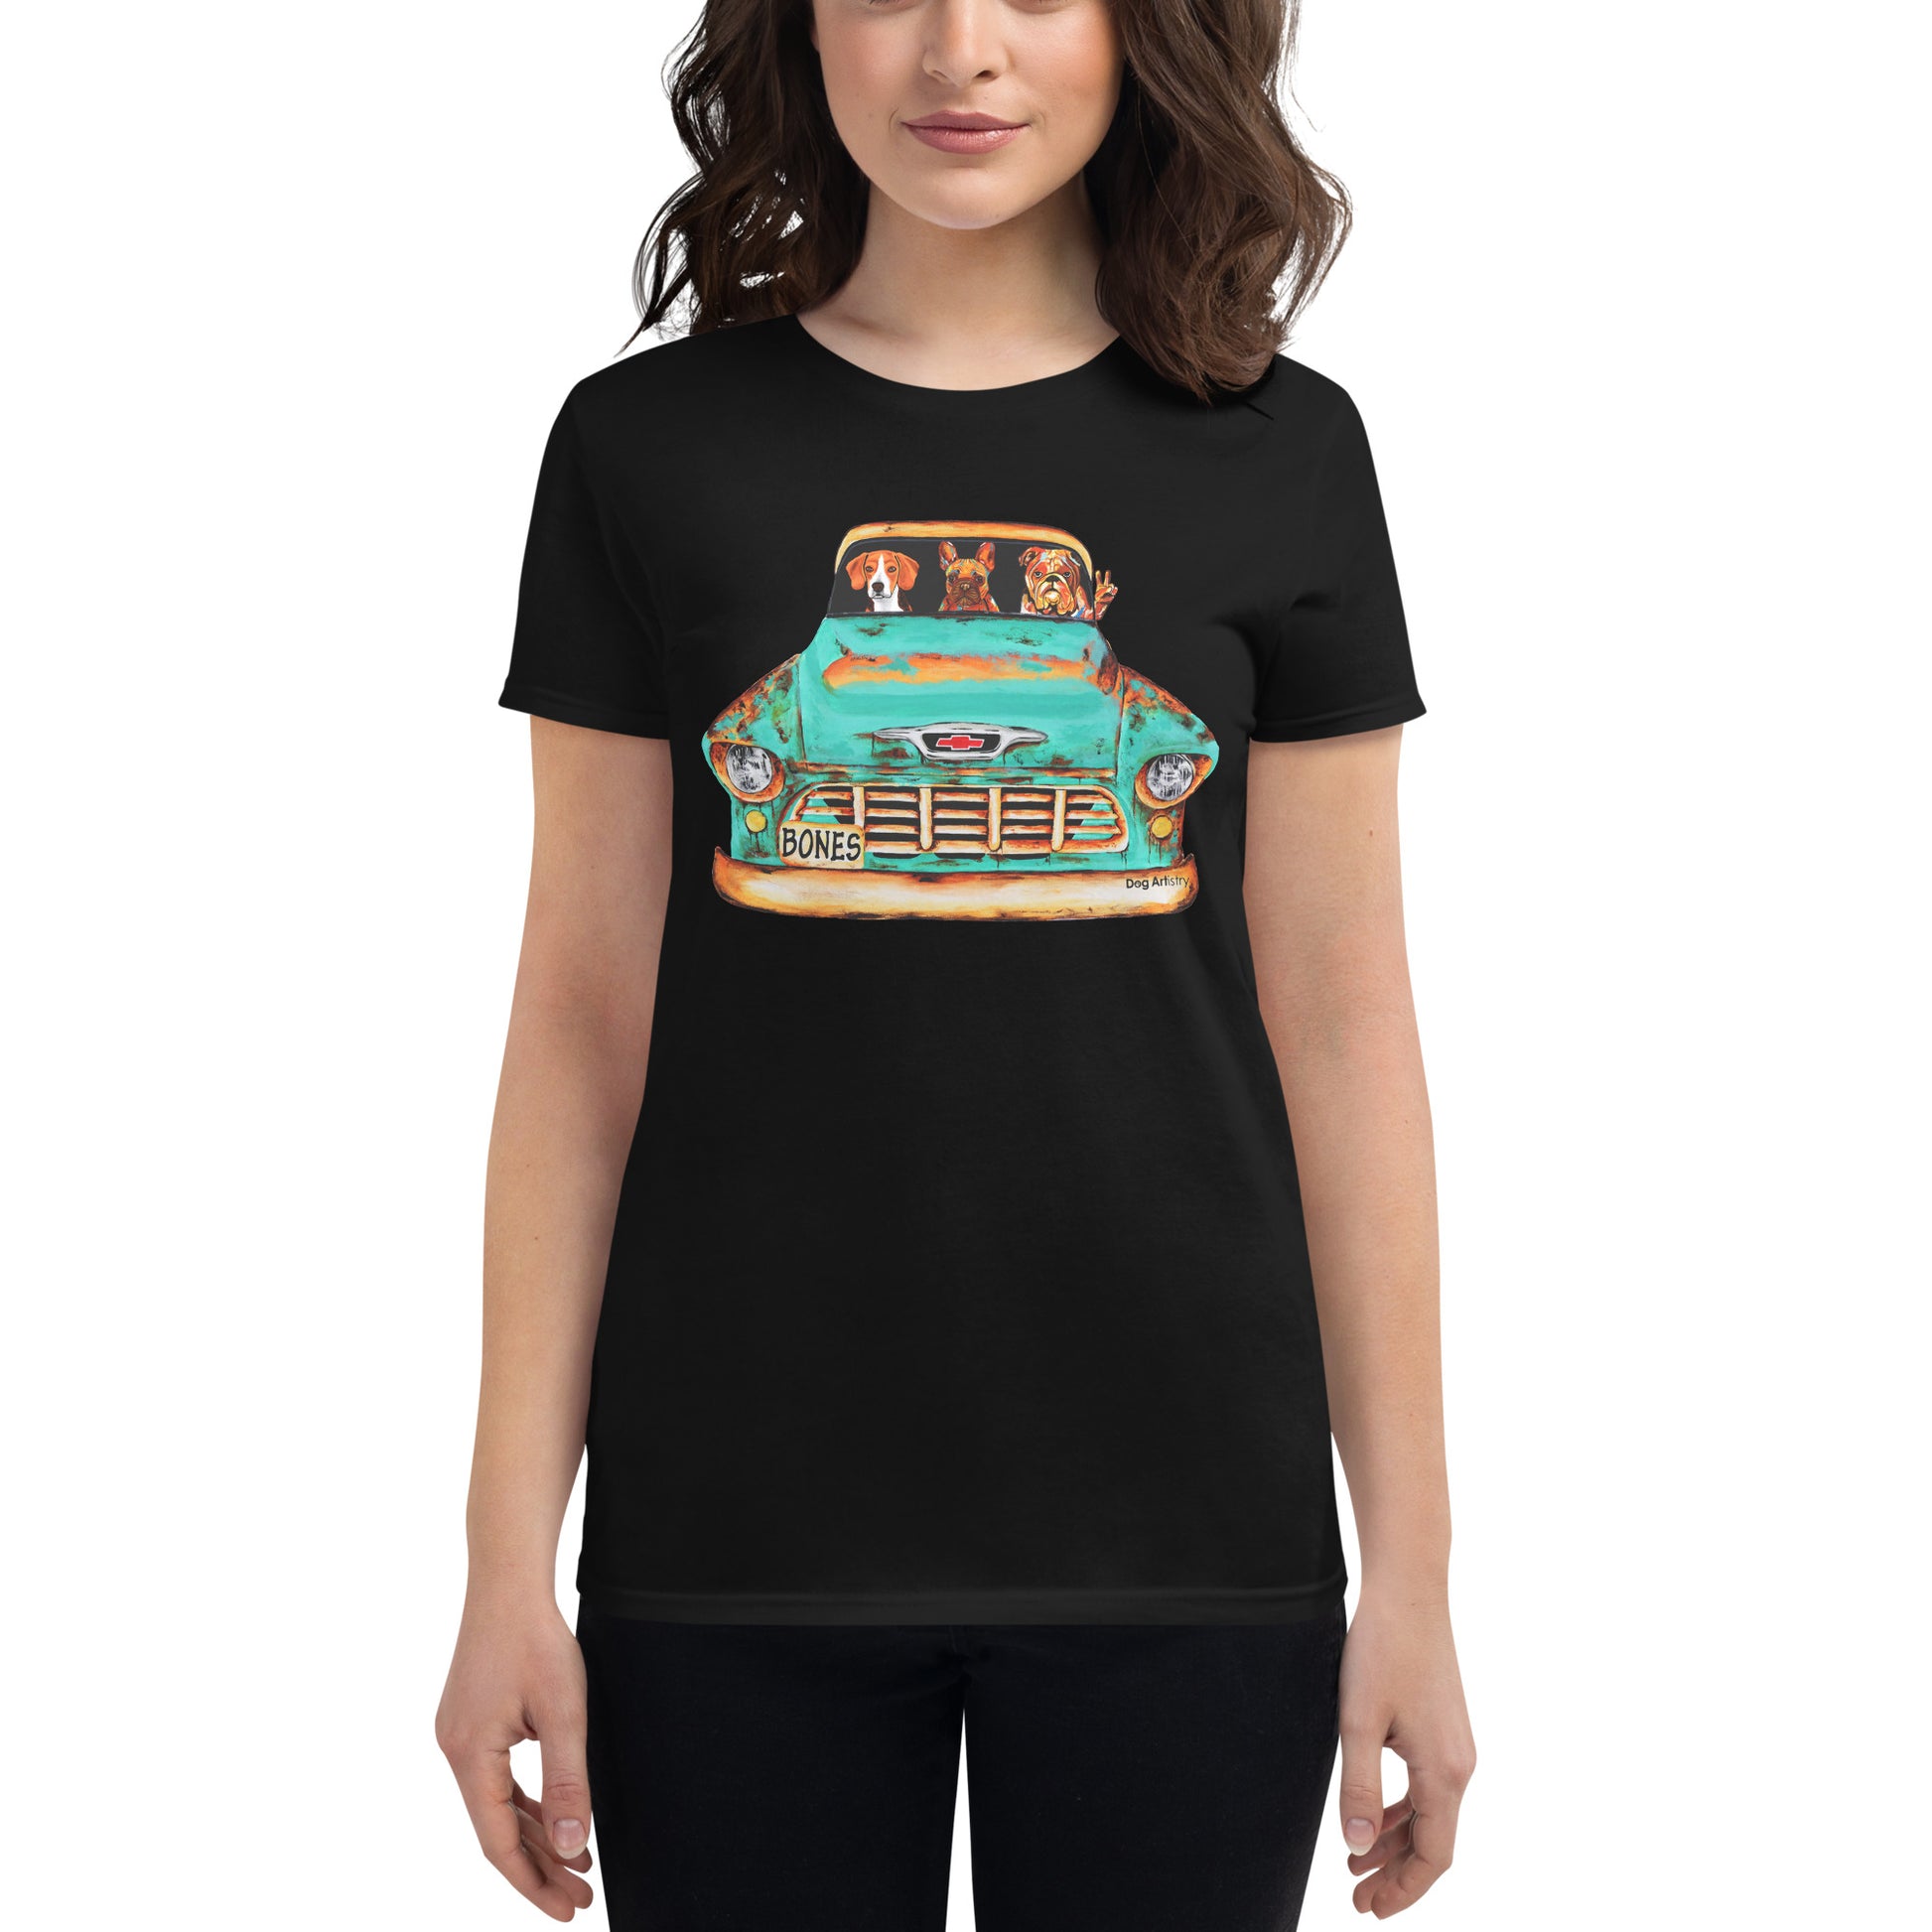 Dog Artistry Women’s T-Shirt of a 55 Chevy Truck with Beagle, French Bulldog, and English Bulldog